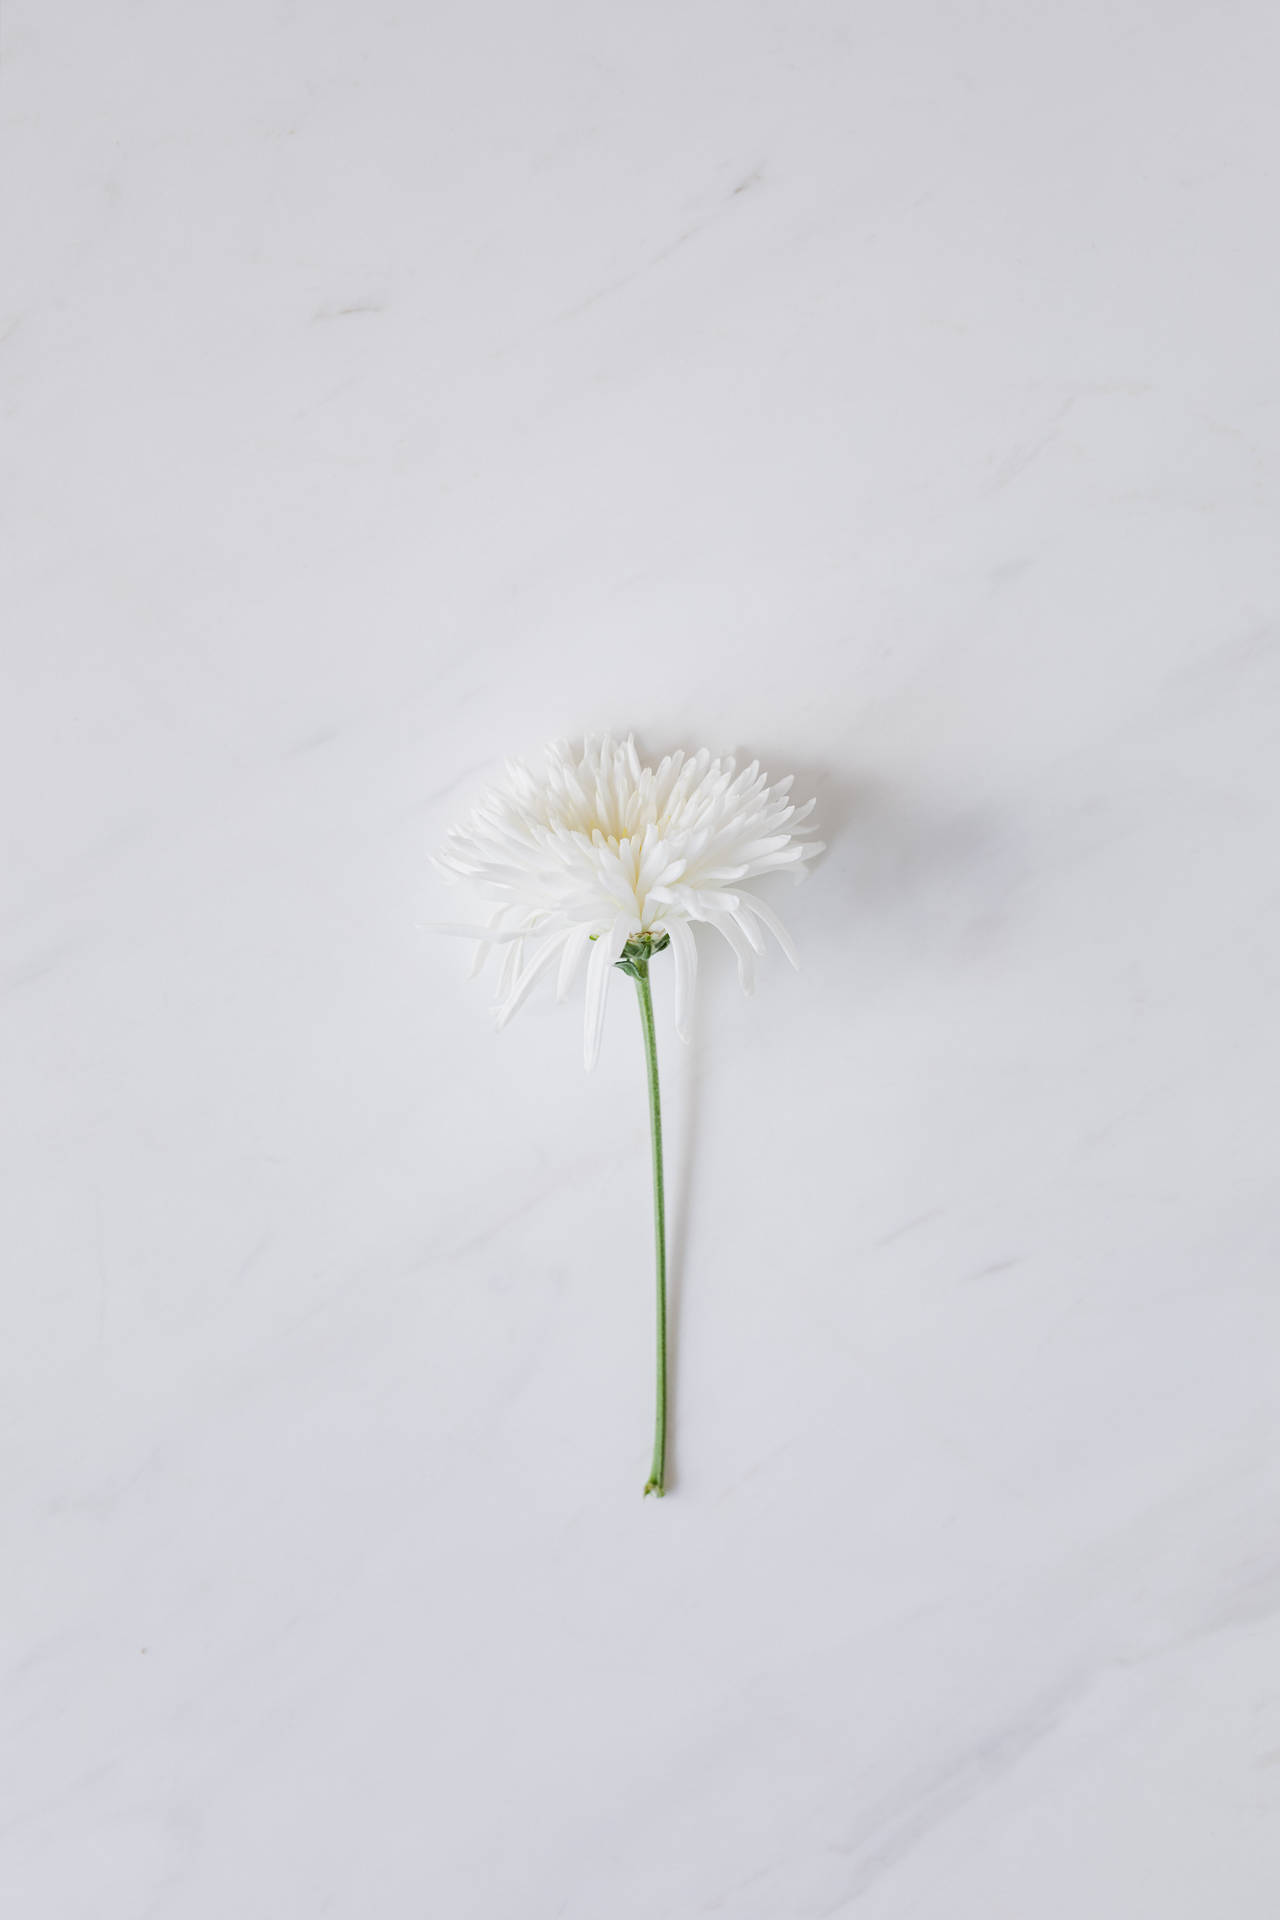 Solid White Daisy Flower Background